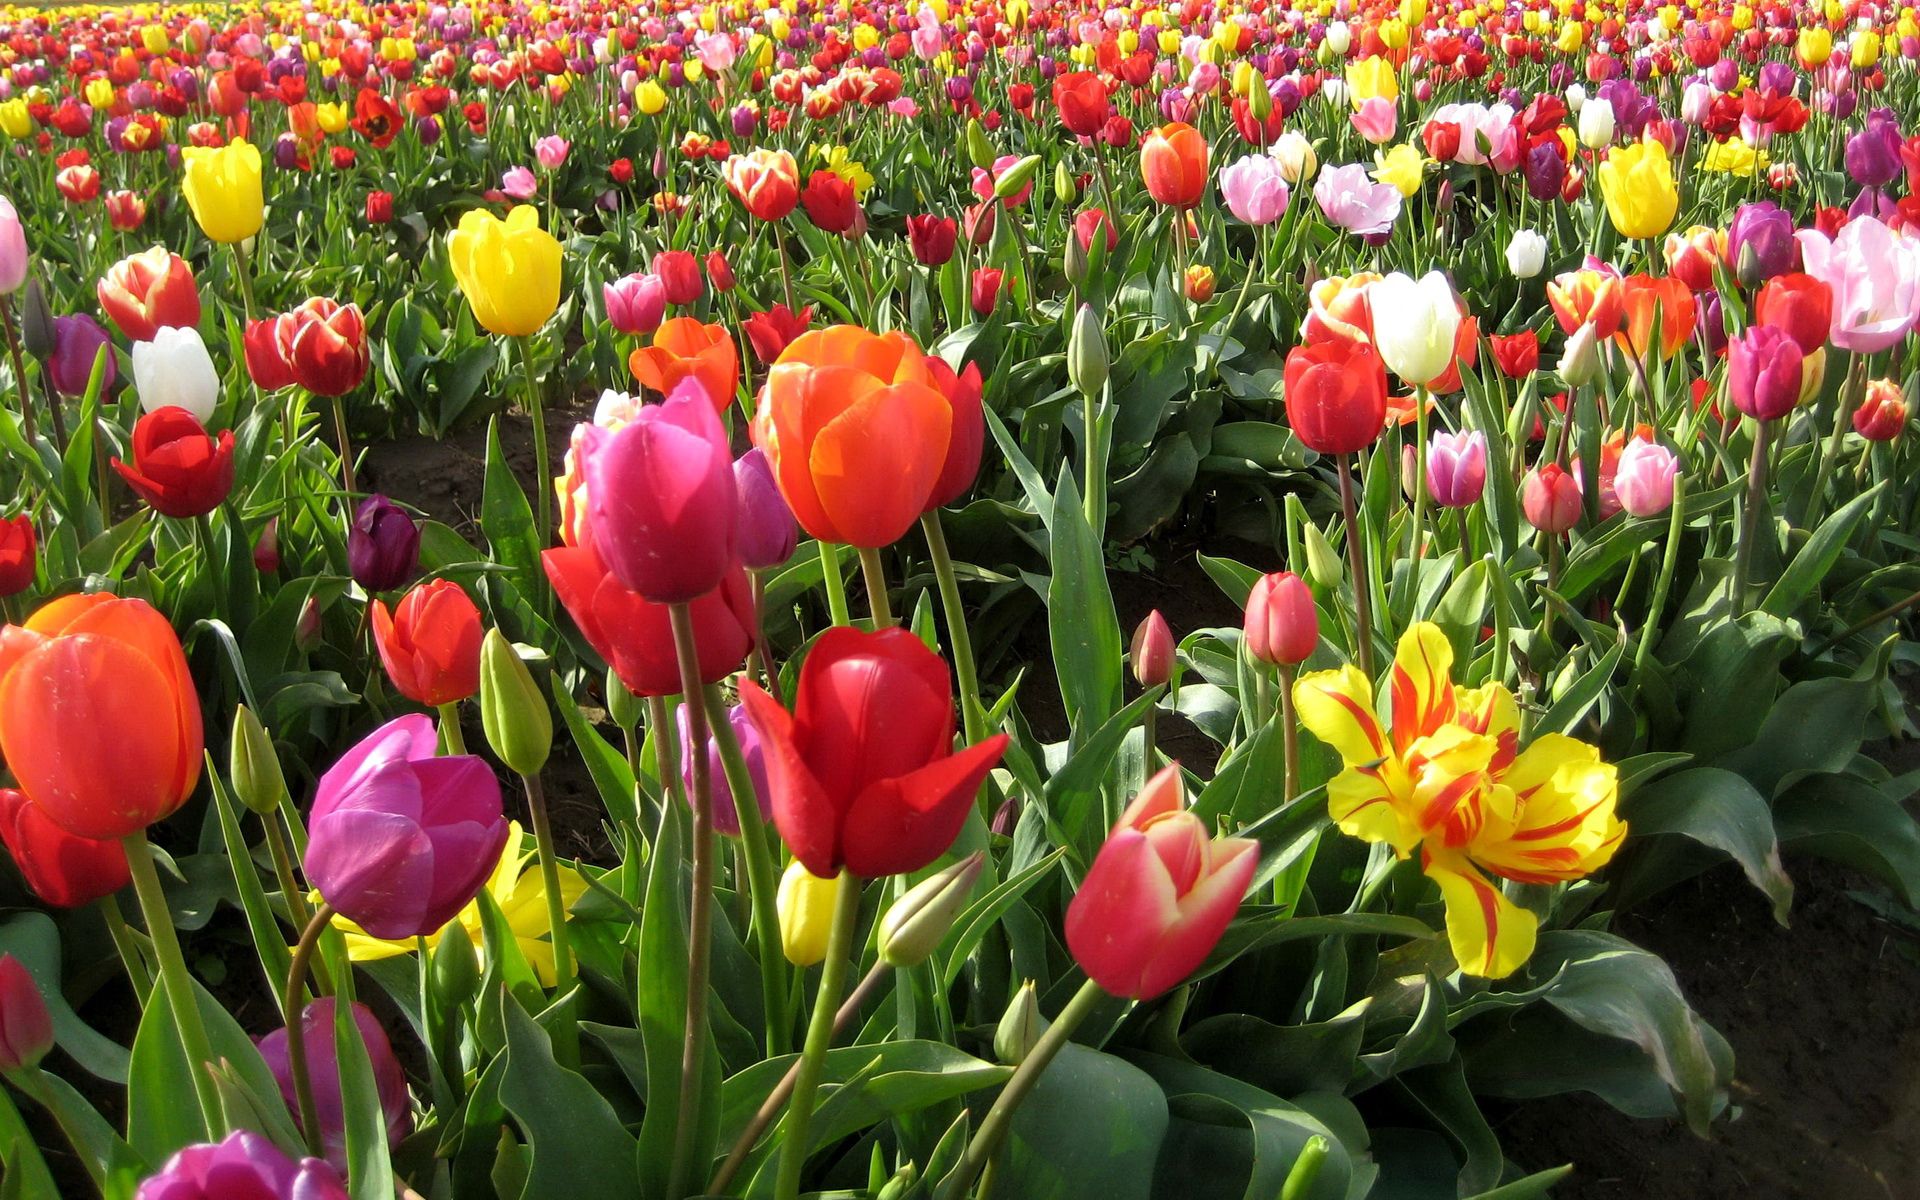 flowers, tulips, beauty, field, spring, different High Definition image